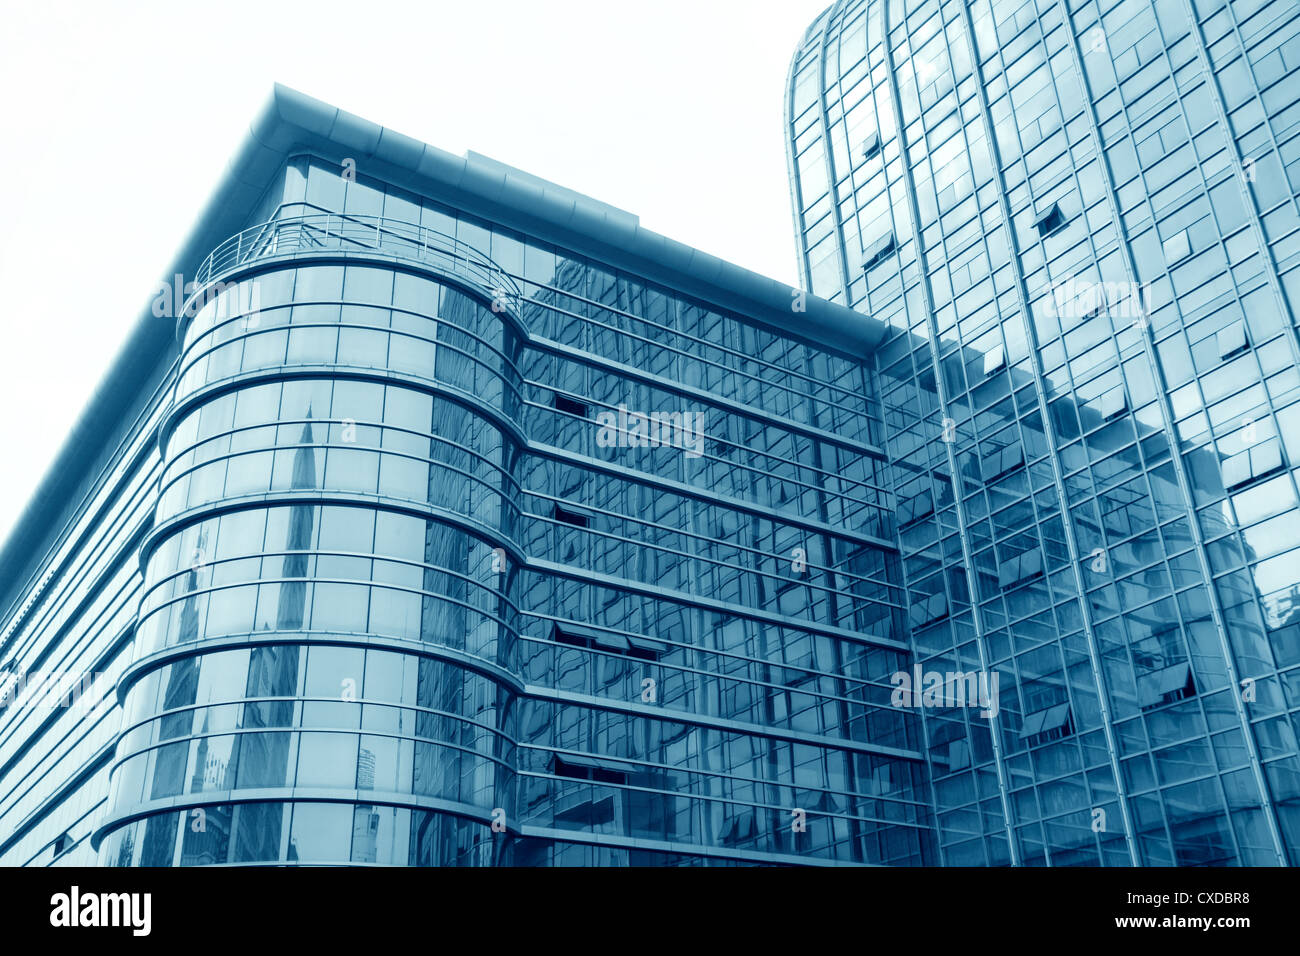 Glass curtain wall building Foto Stock